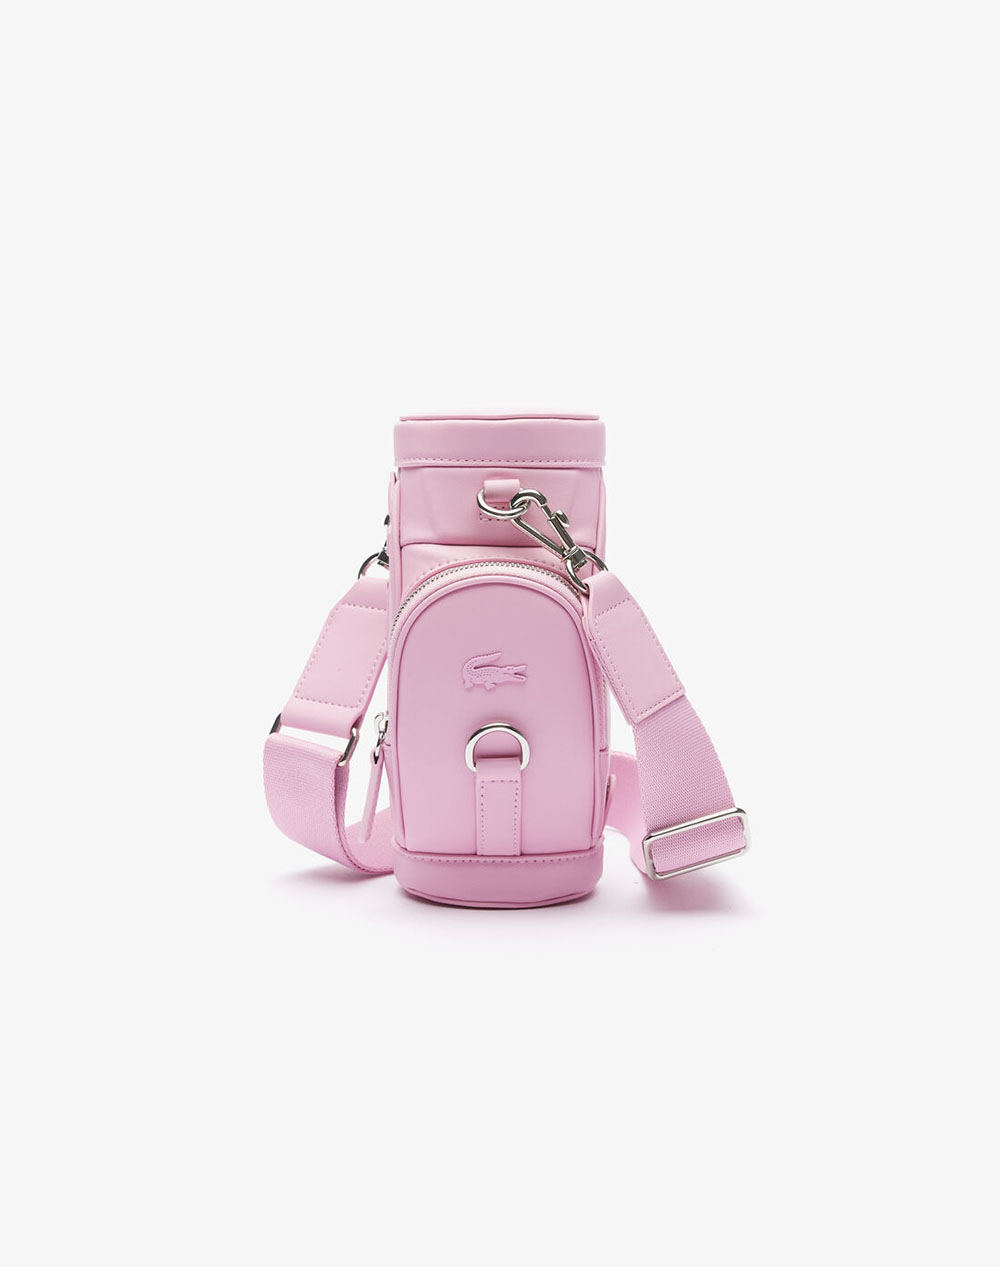 LACOSTE ΤΣΑΝΤΑ XS CROSSOVER BAG 3NF4616MD-N52 LightPink